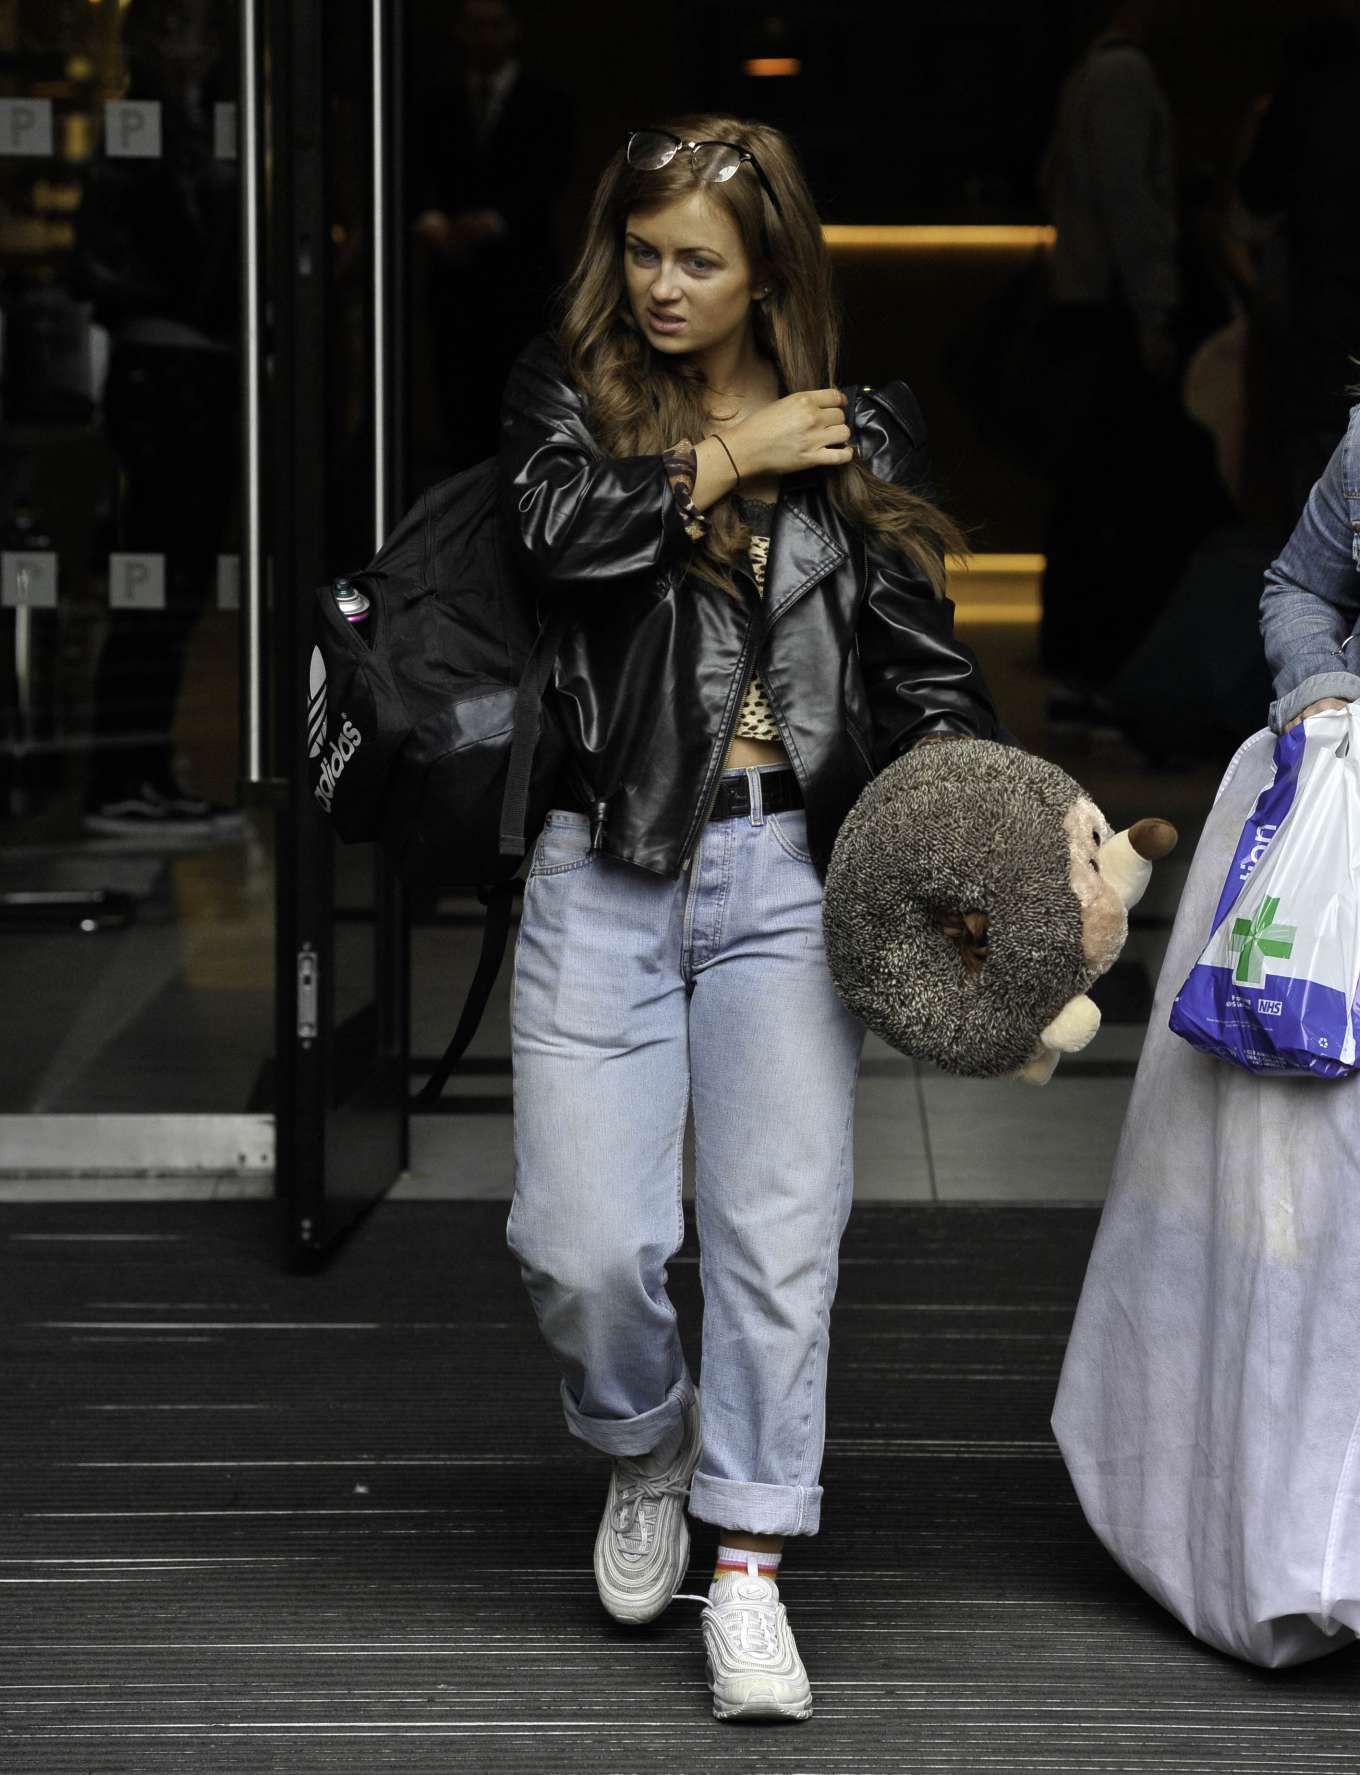 Maisie Smith â€“ Soap Stars exit their hotel in Manchester